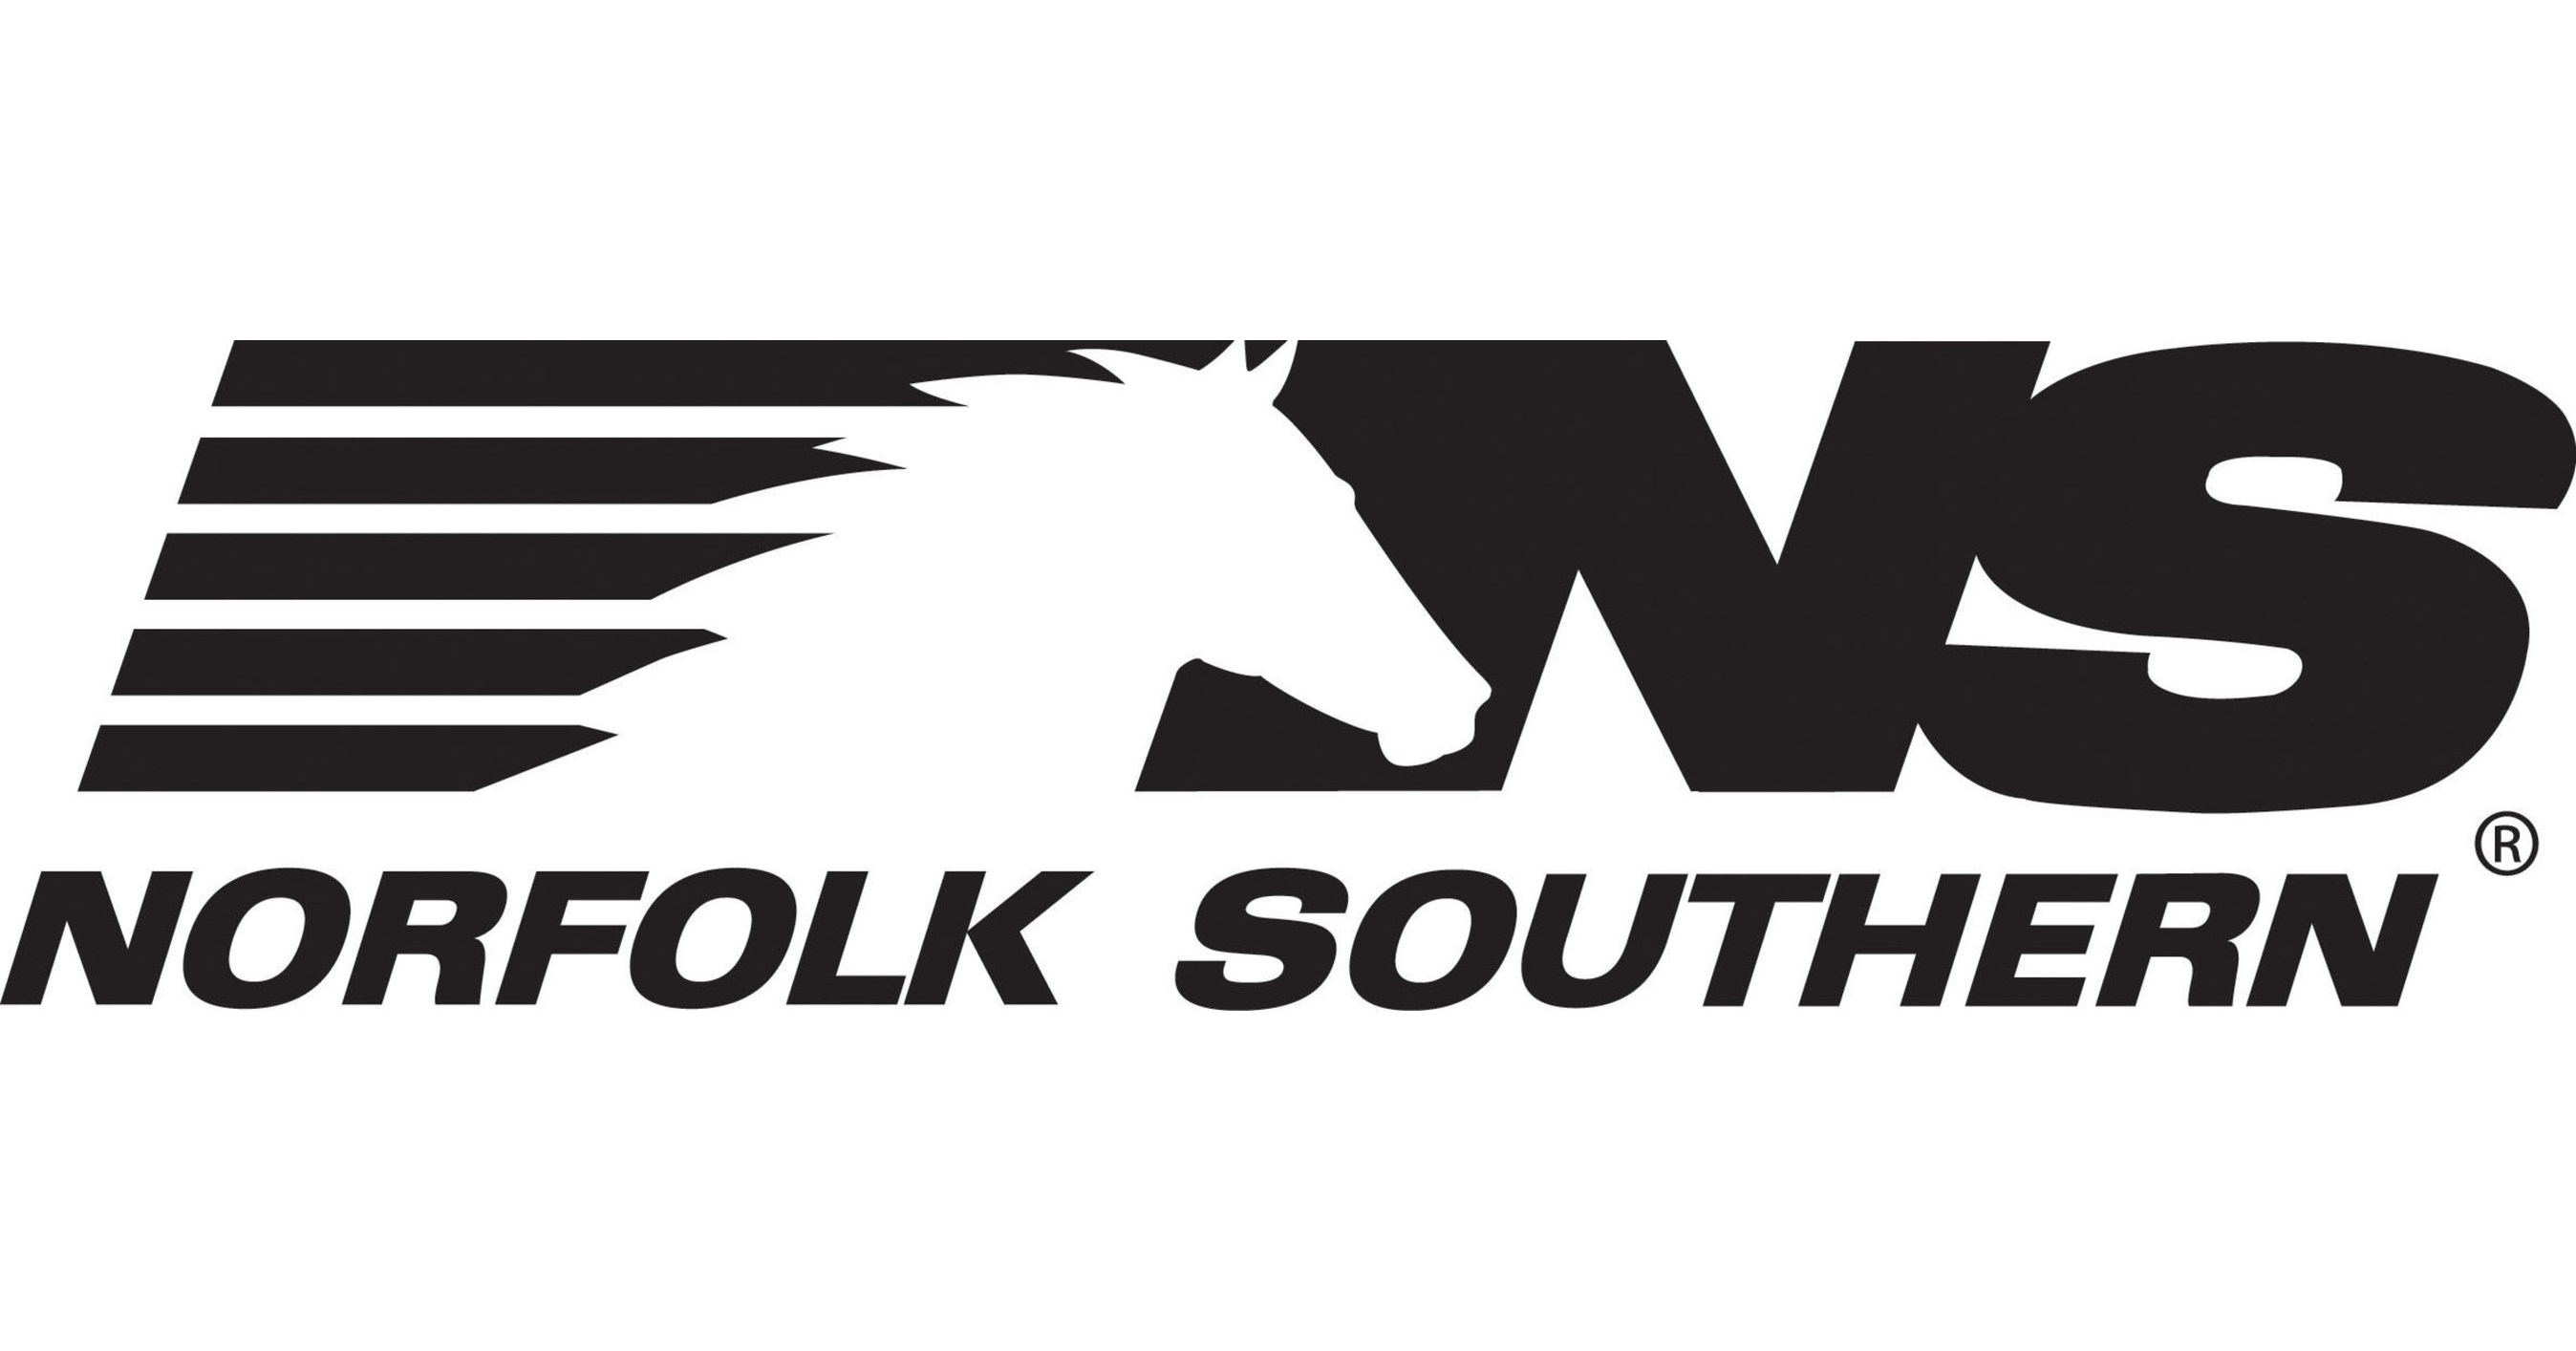 Norfolk Southern CEO delivers testimony before the U.S. Senate Committee on Environment & Public Works